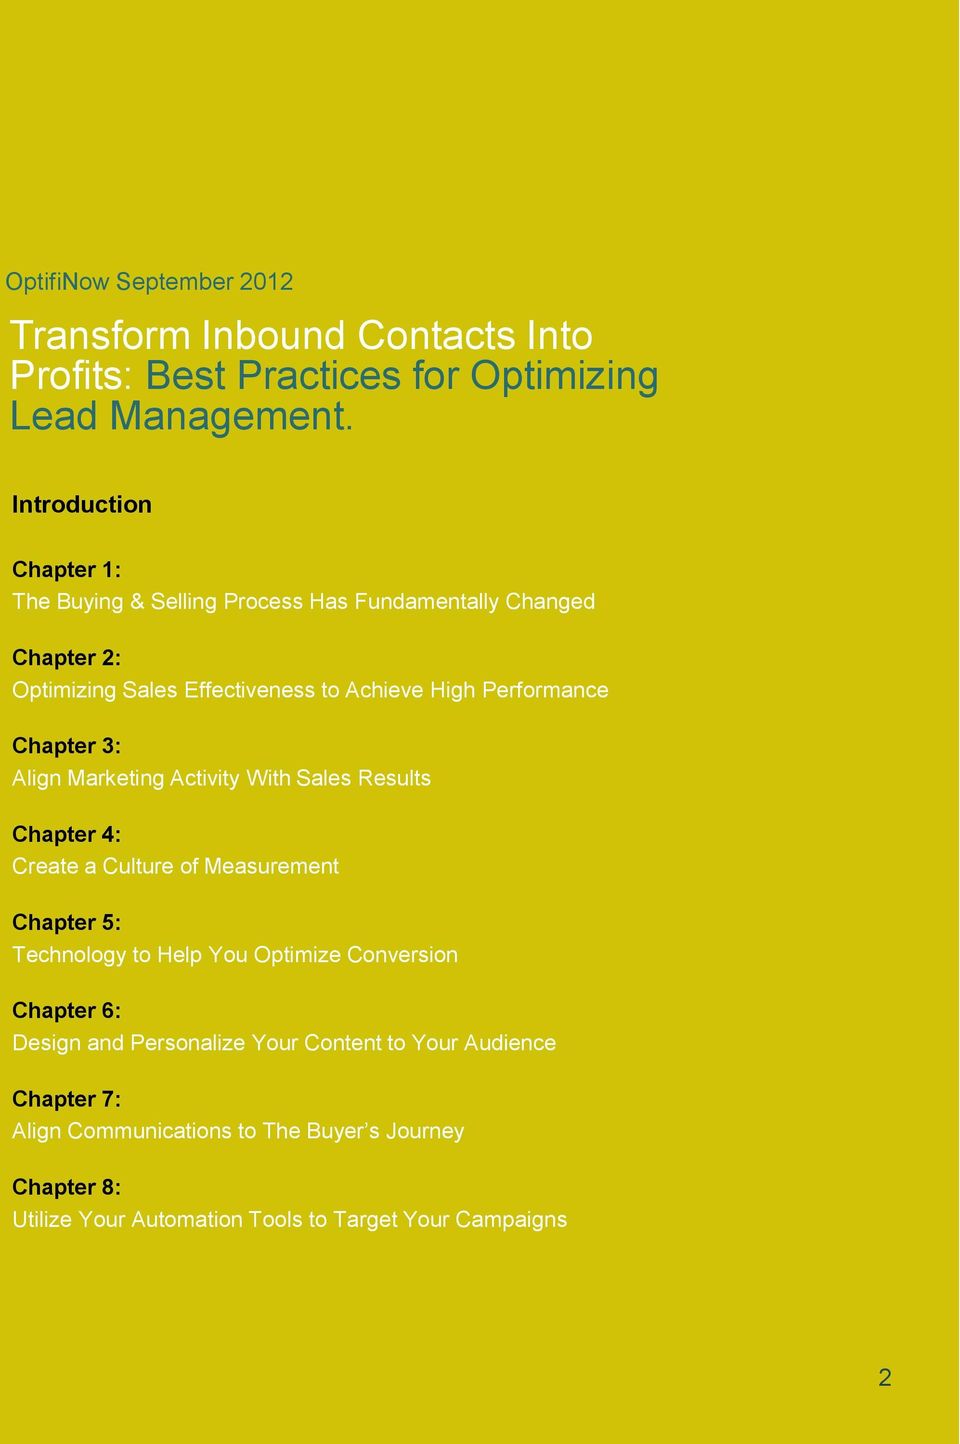 Chapter 3: Align Marketing Activity With Sales Results Chapter 4: Create a Culture of Measurement Chapter 5: Technology to Help You Optimize